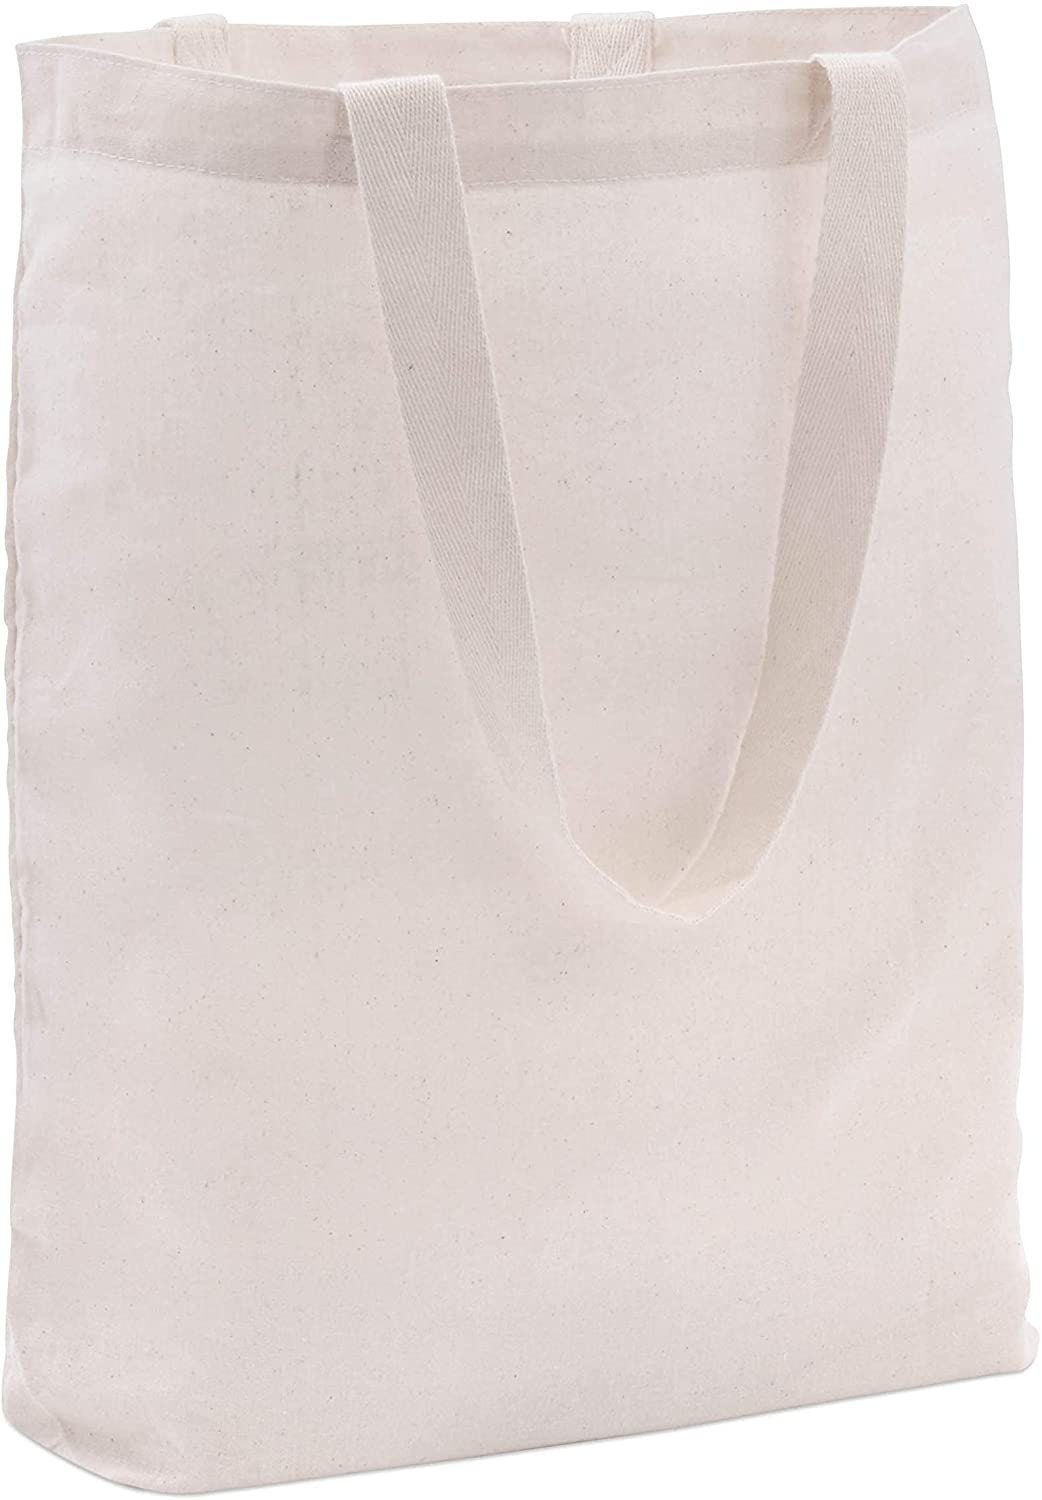 Sublimation Tote Bags Blanks 20 Pack 14.5x15.75x 3.5 Cotton Reusable Bag  With Handles, Blank Natural Cotton for Gifts, Small Businesses, 